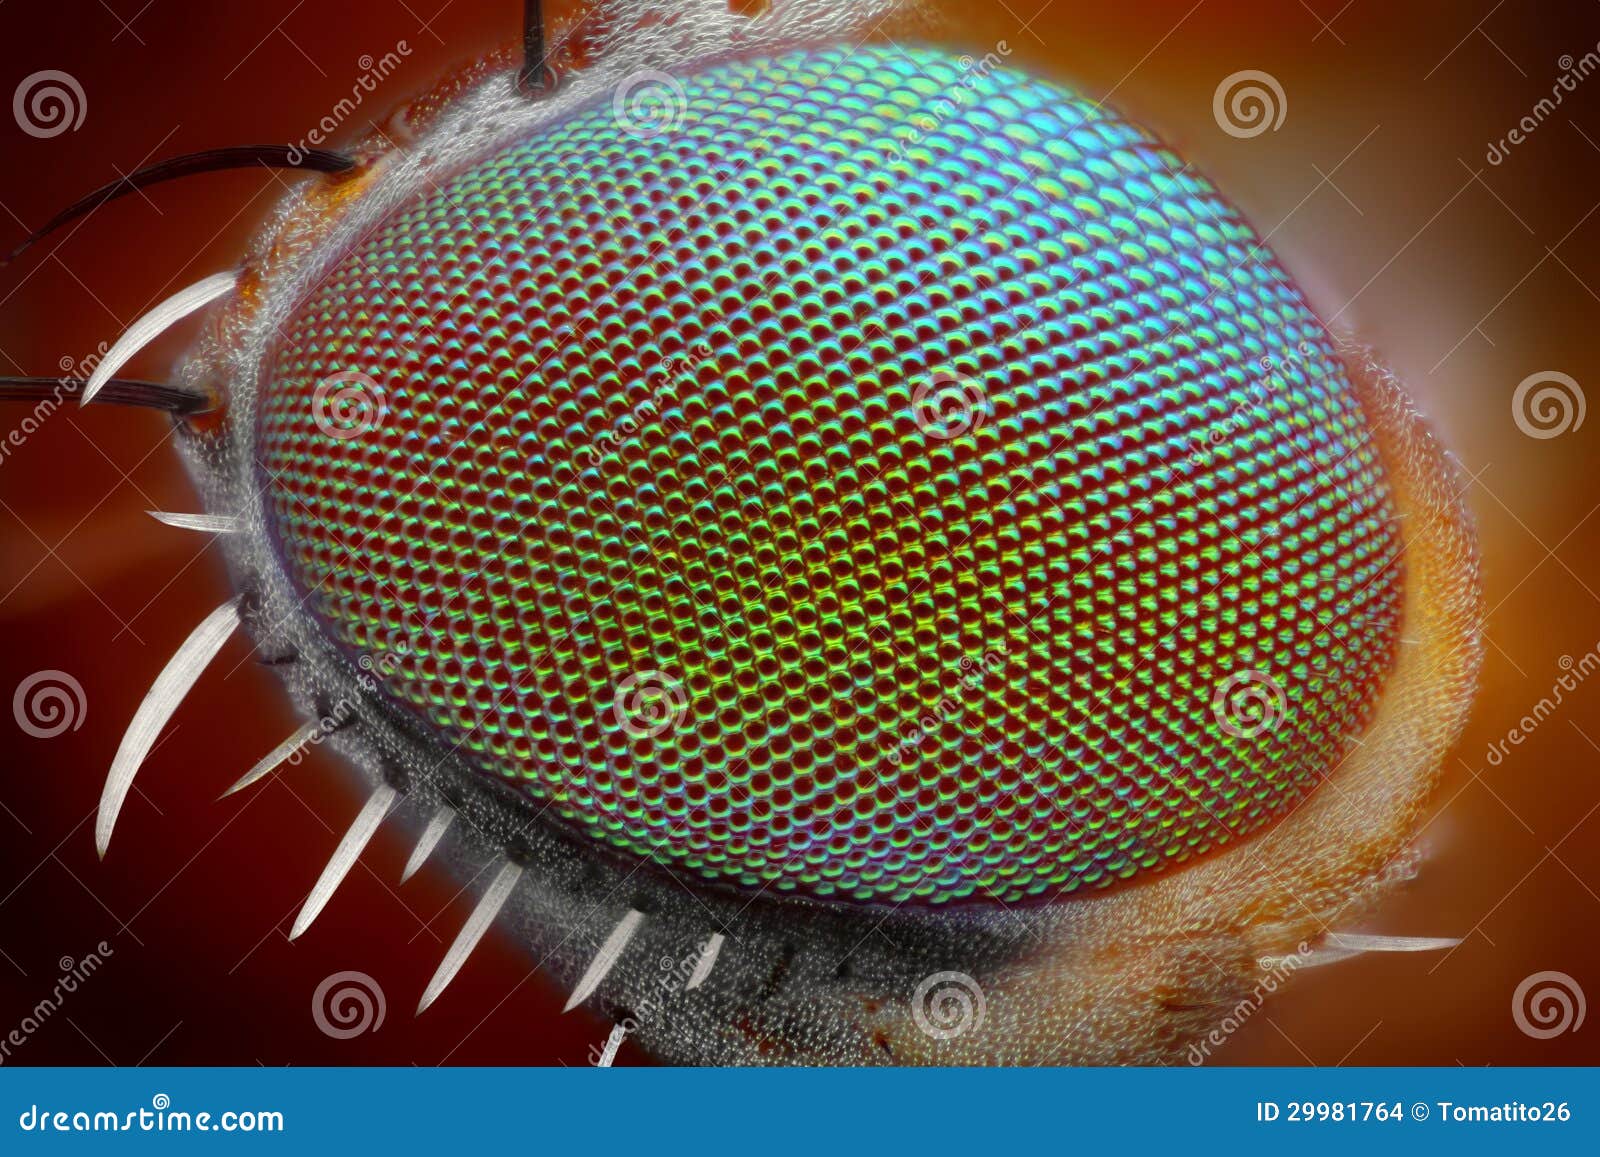 https://thumbs.dreamstime.com/z/macro-fly-compound-eye-surface-magnification-29981764.jpg